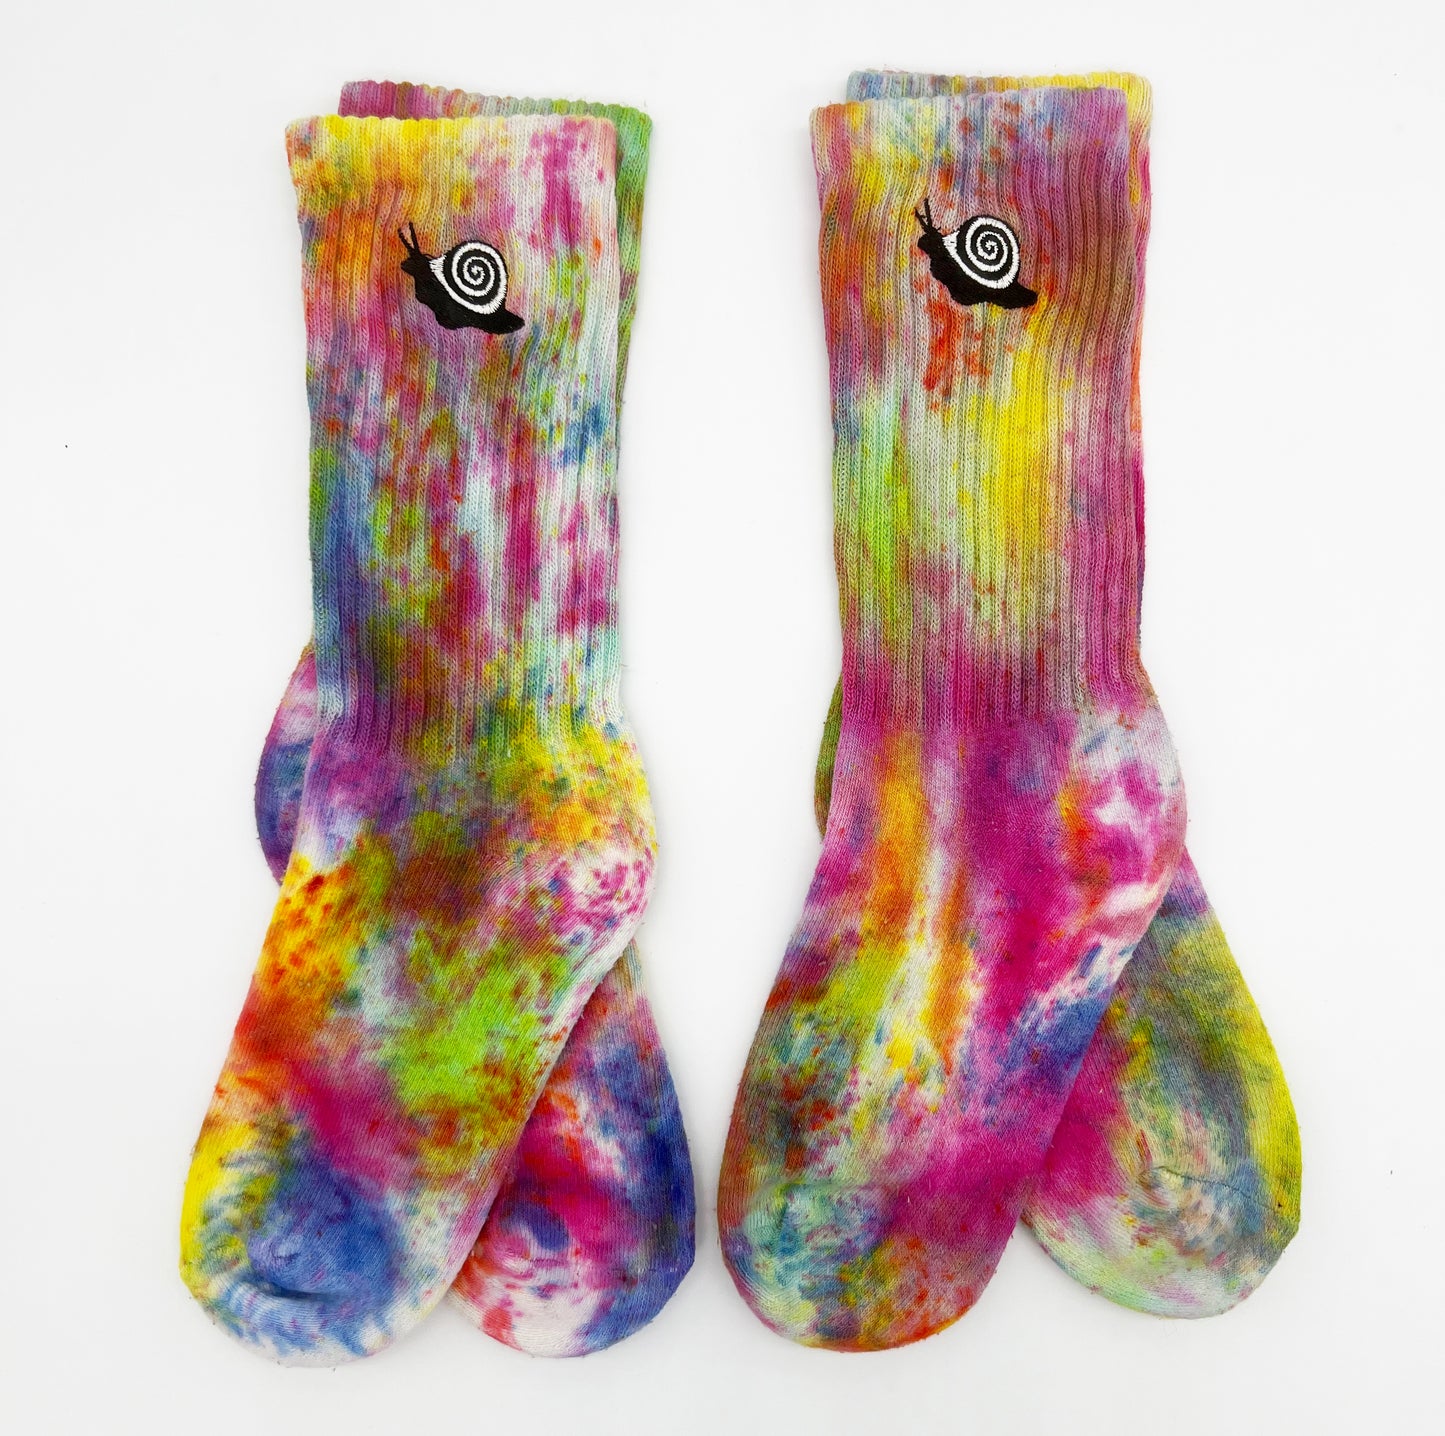 Party Rainbow dyed socks with black and white embroidered spiral snail